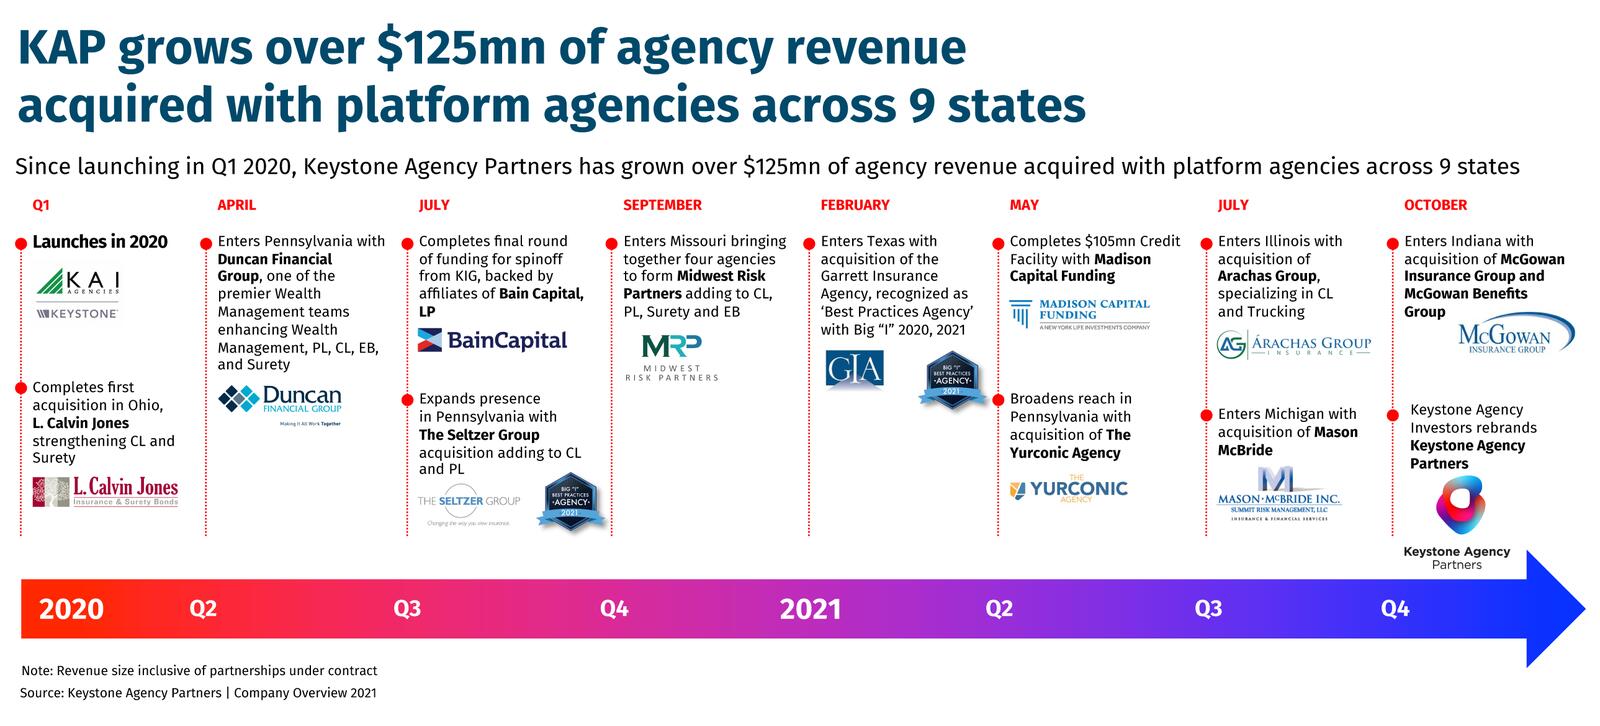 KAP grows over $125mn of agency revenue acquired with platform agencies across 9 states